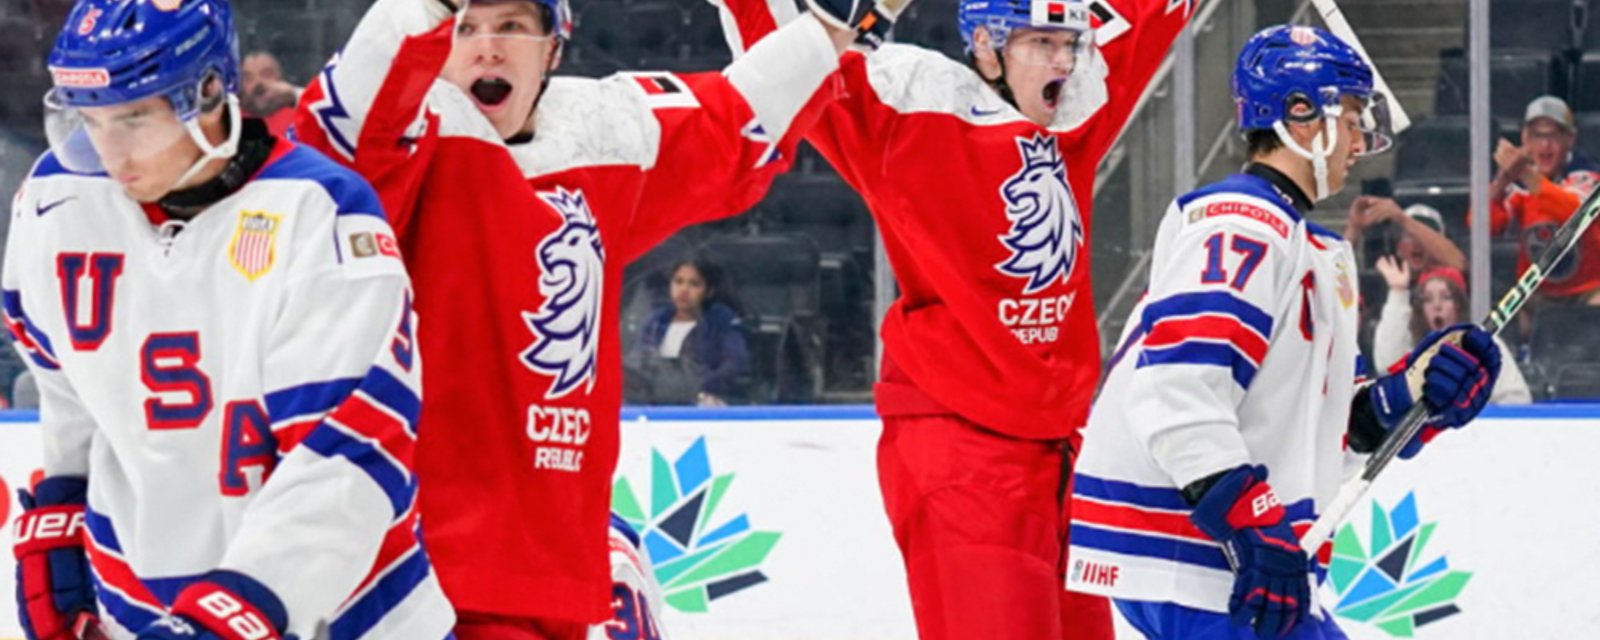 Czechs stun USA, take them out of medal contention